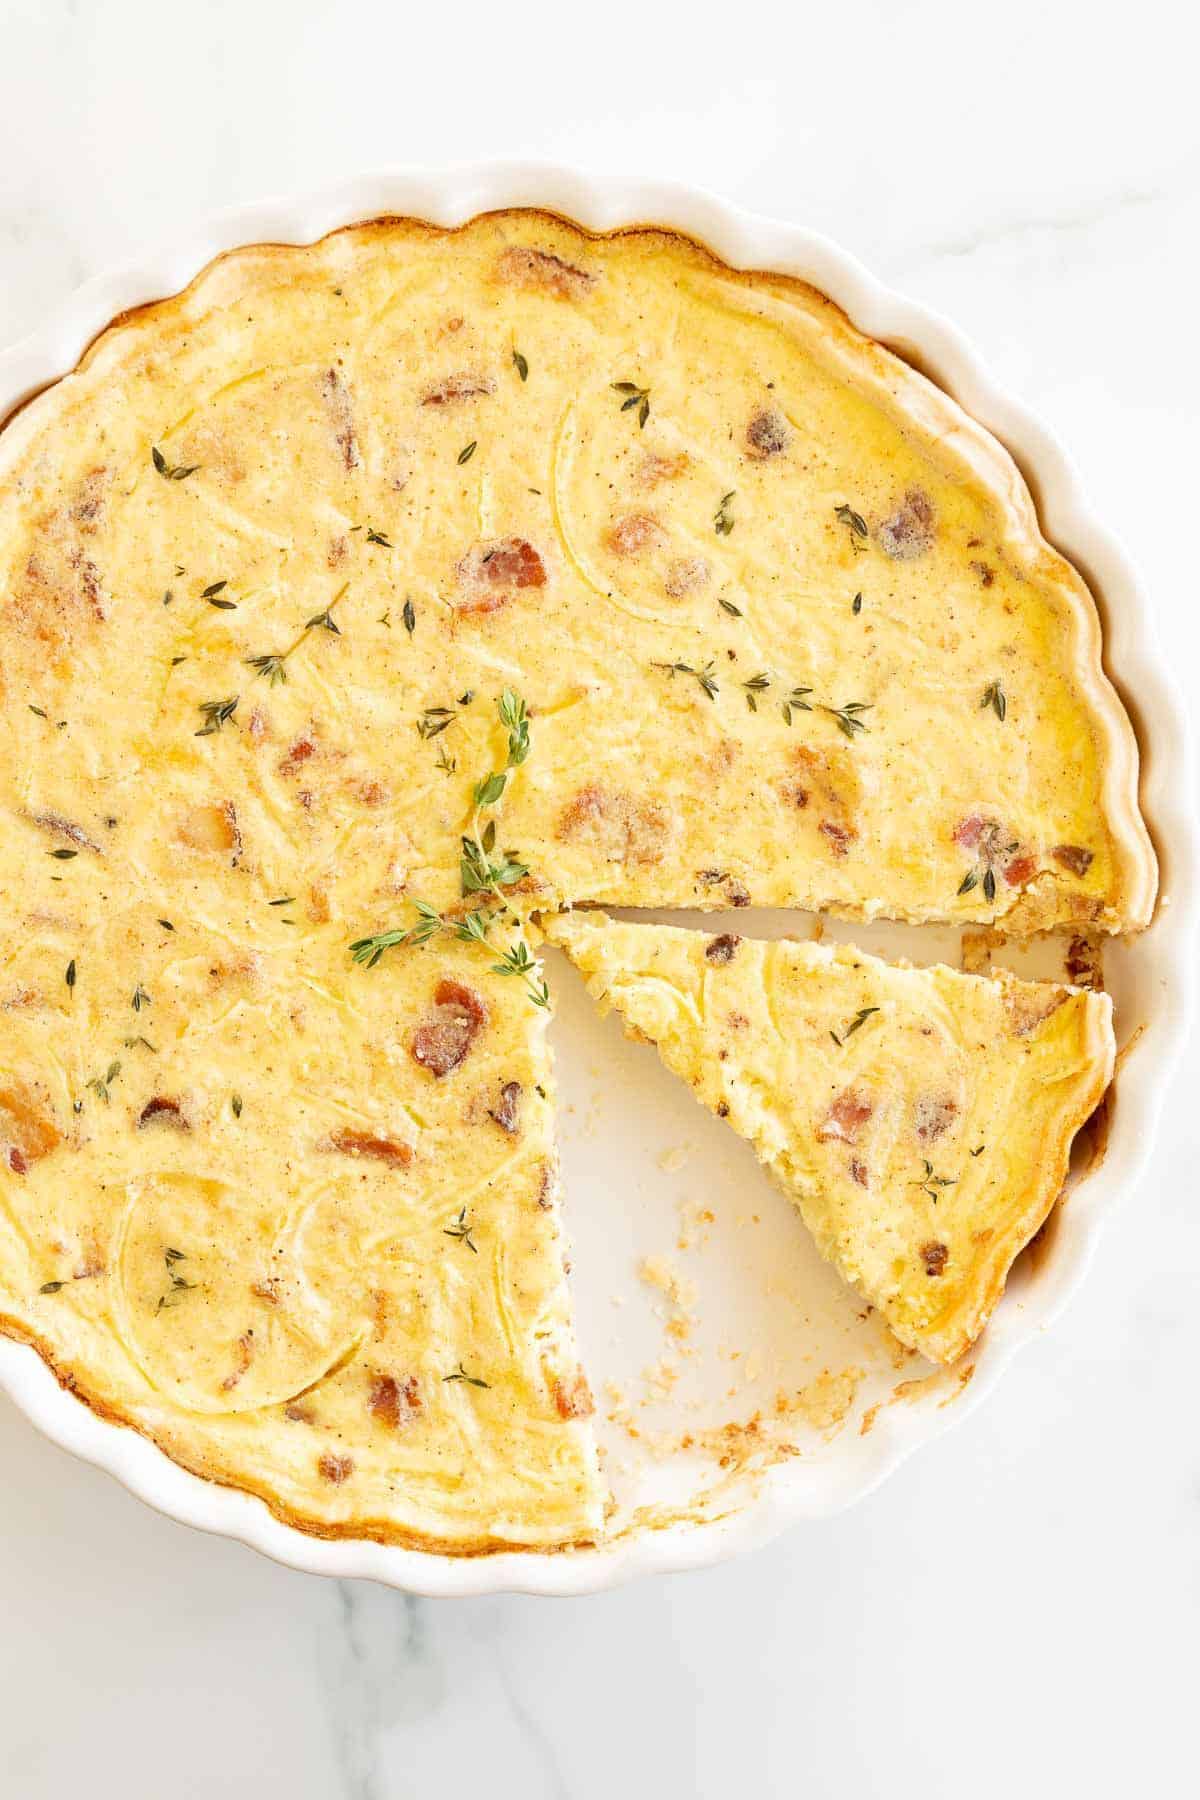 A homemade quiche in a white pie pan on a marble surface, one slice removed.